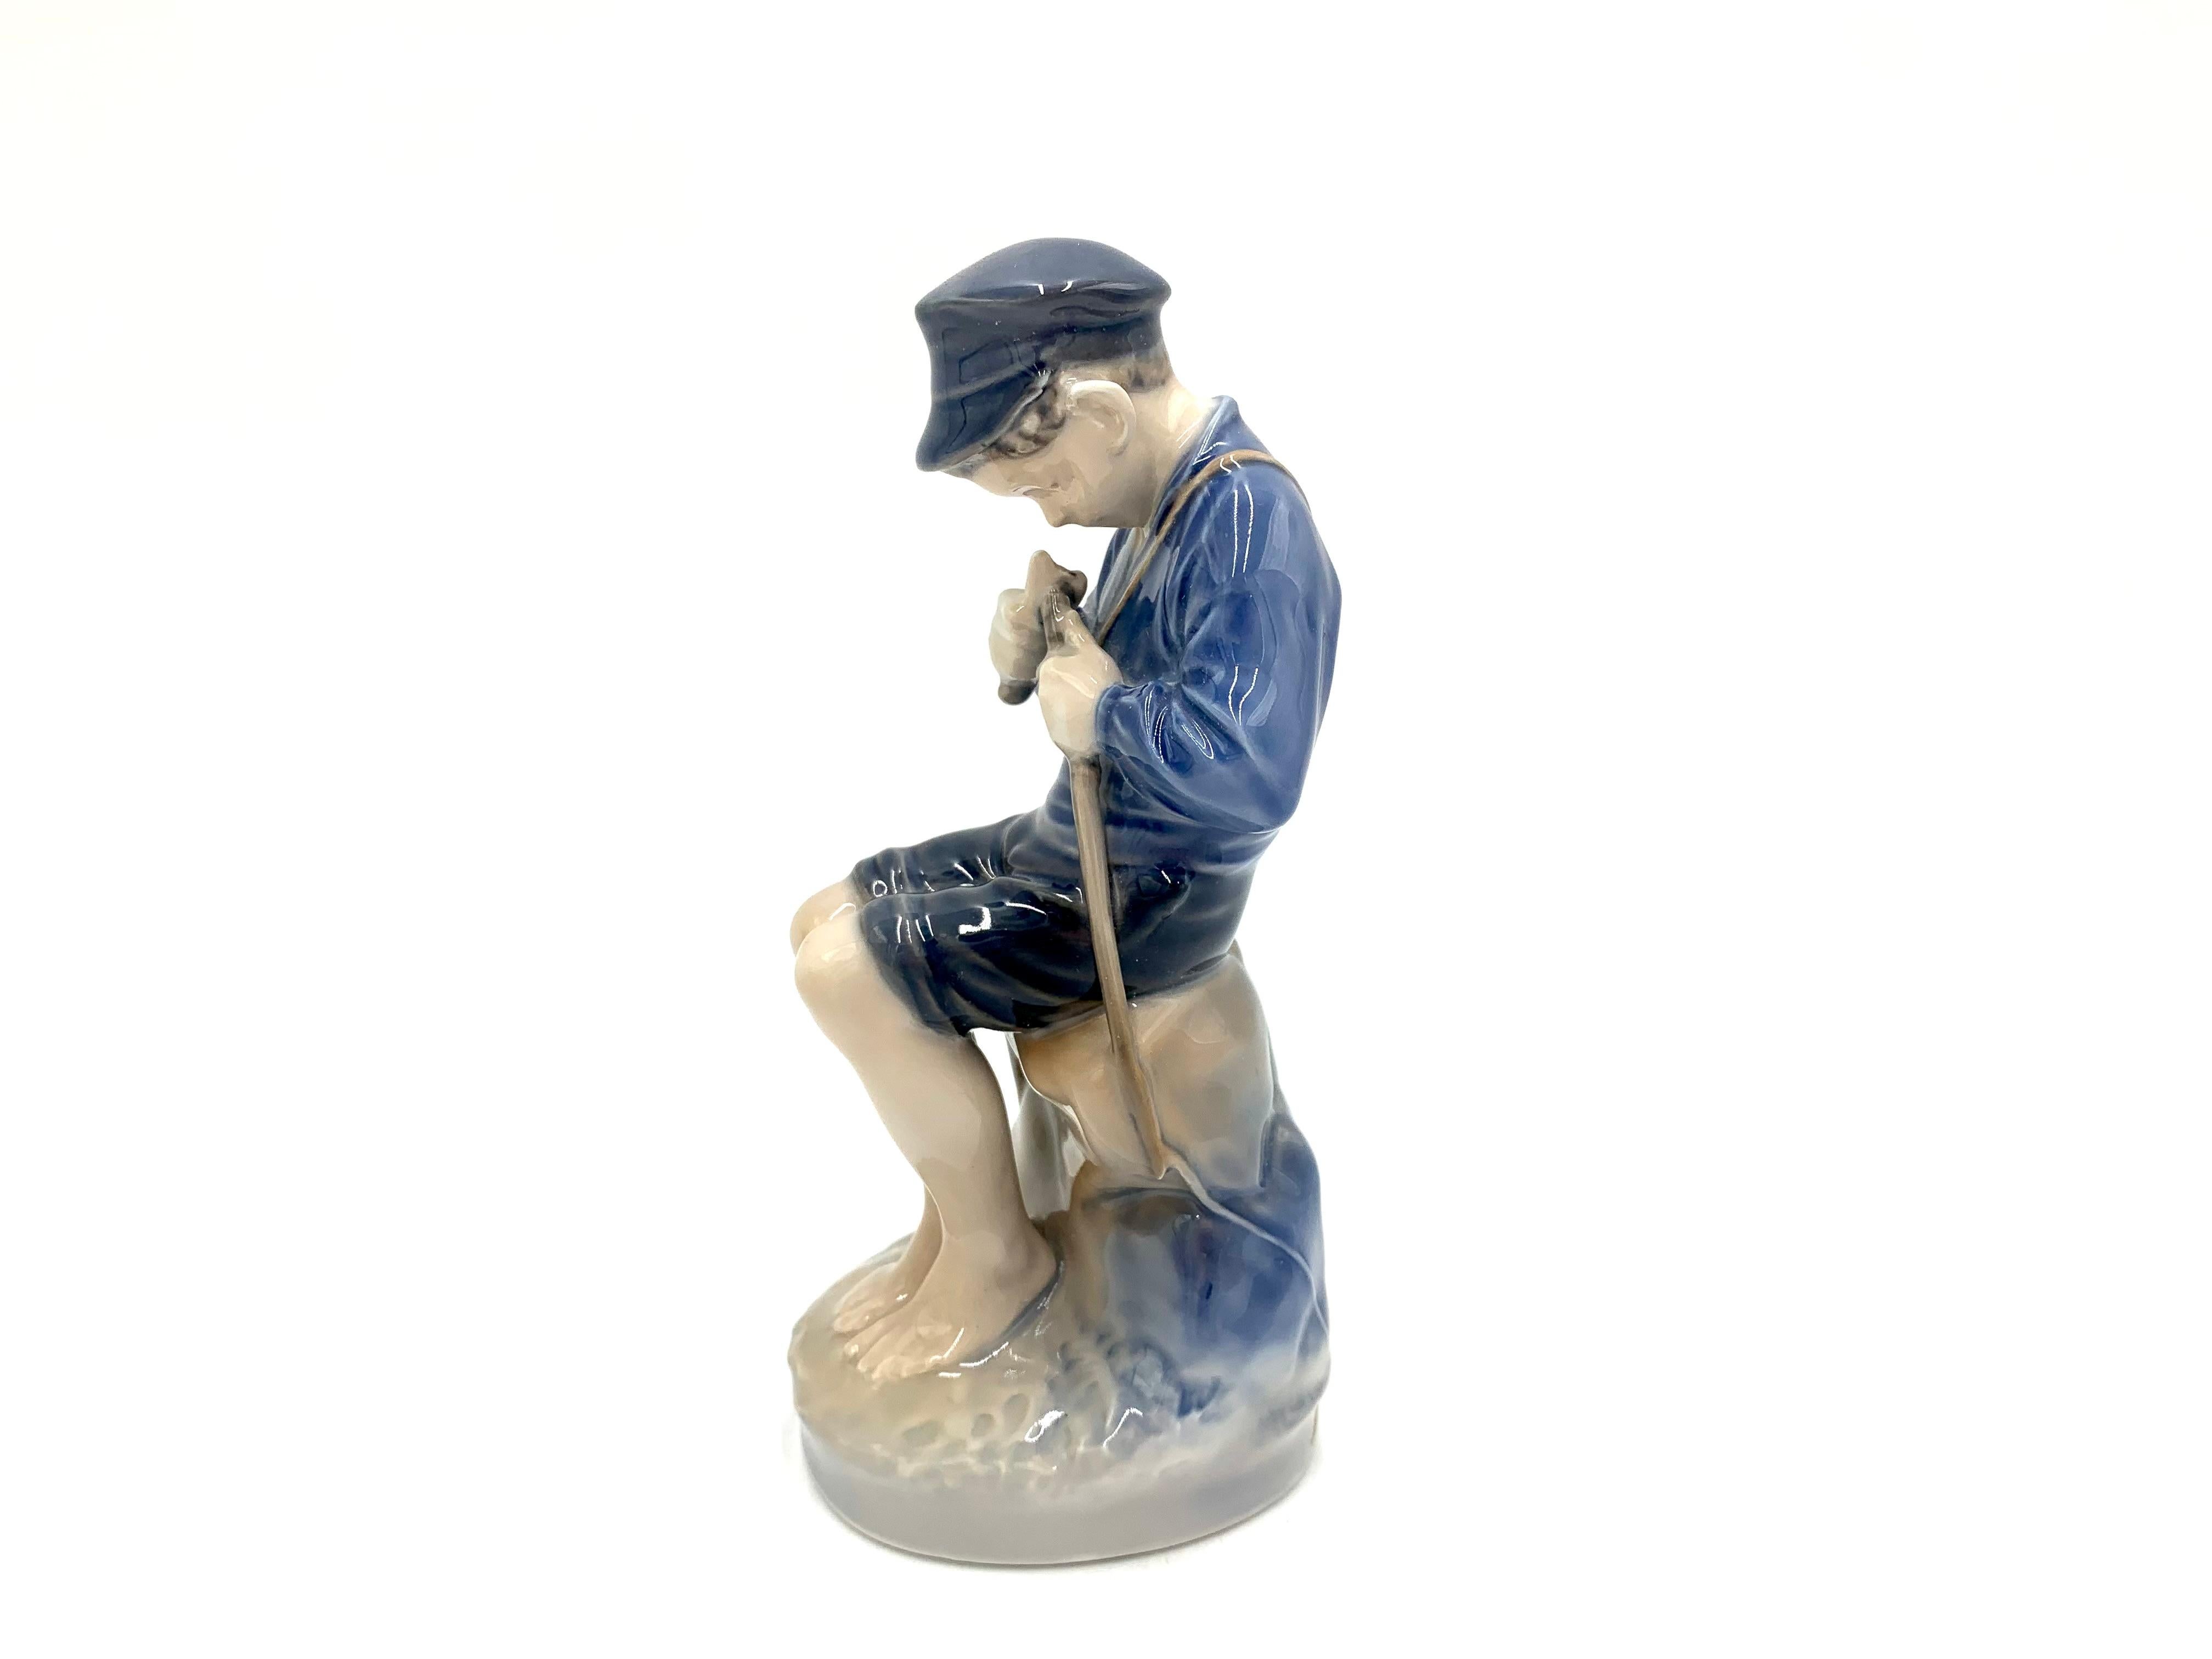 Porcelain figurine of a boy chipping a stick

Made in Denmark by the Royal Copenhagen manufactory

Manufactured in the 1960s.

Model number 905

Very good condition, no damage.

Measures: Height 19cm width 8.5cm depth 7cm.